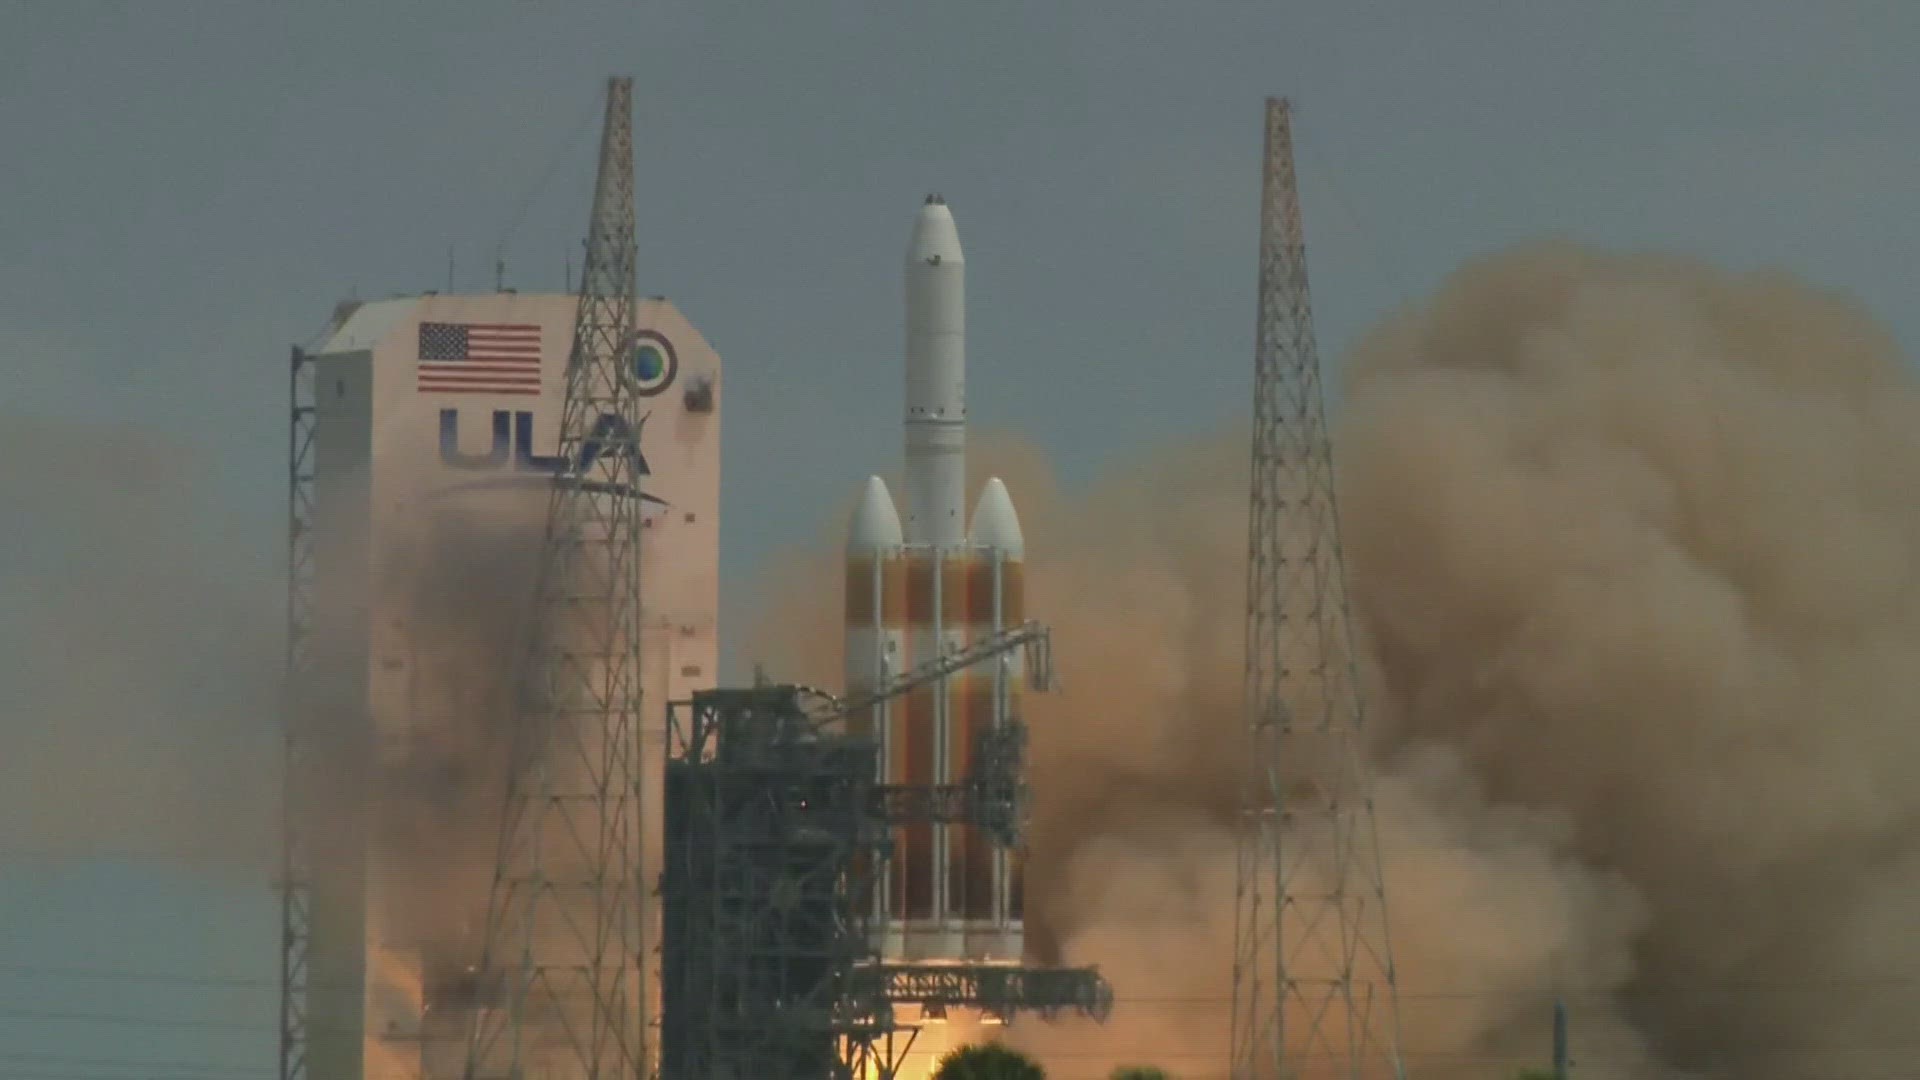 The United Launch Alliance's Delta IV Heavy launched from Cape Canaveral at 12:53 p.m. Tuesday.